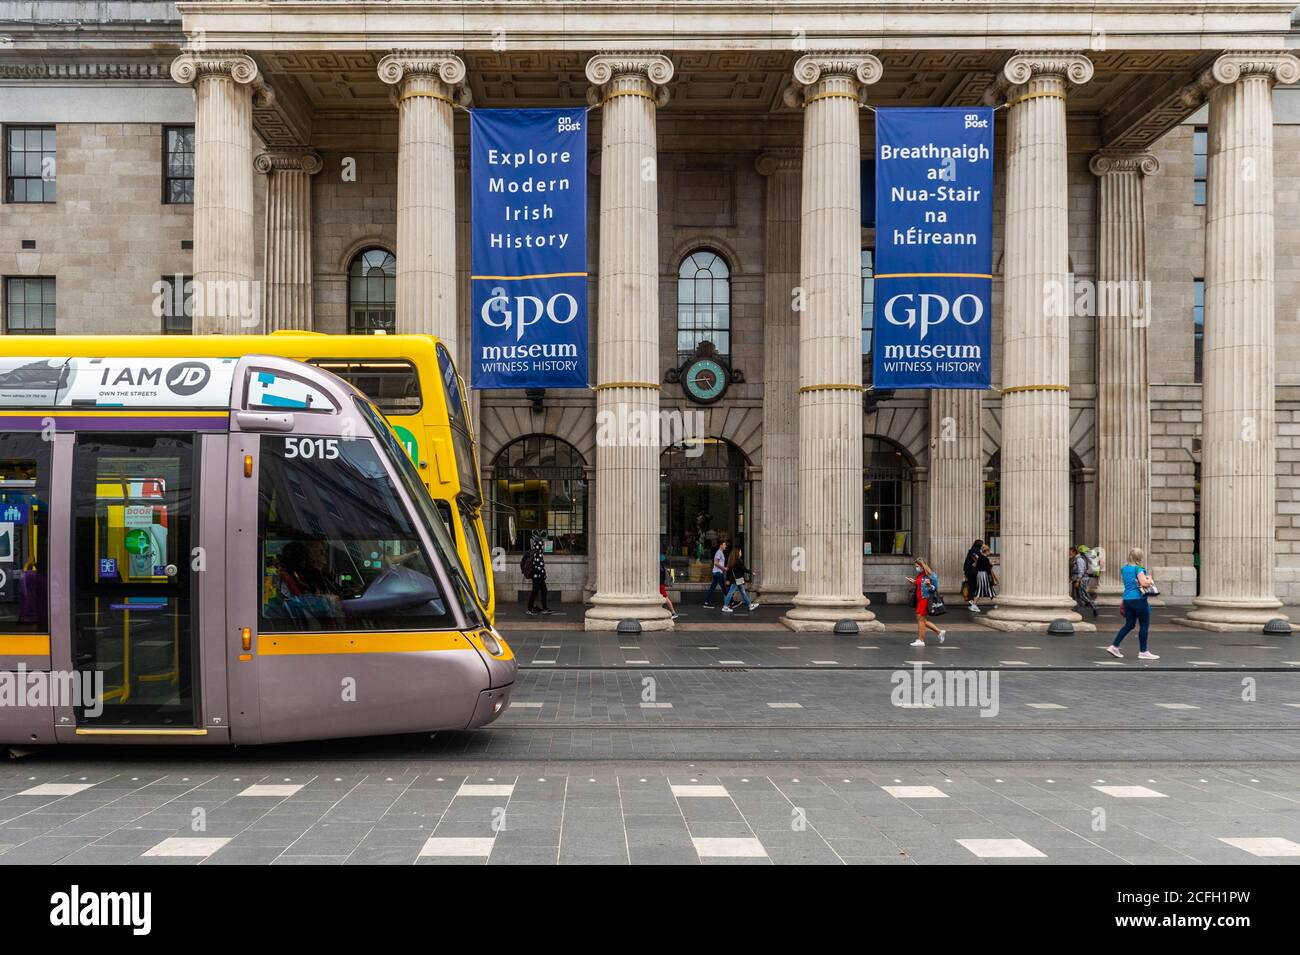 Luas Tram at the GPO, O'Connell Street, Dublin, Ireland. Stock Photo